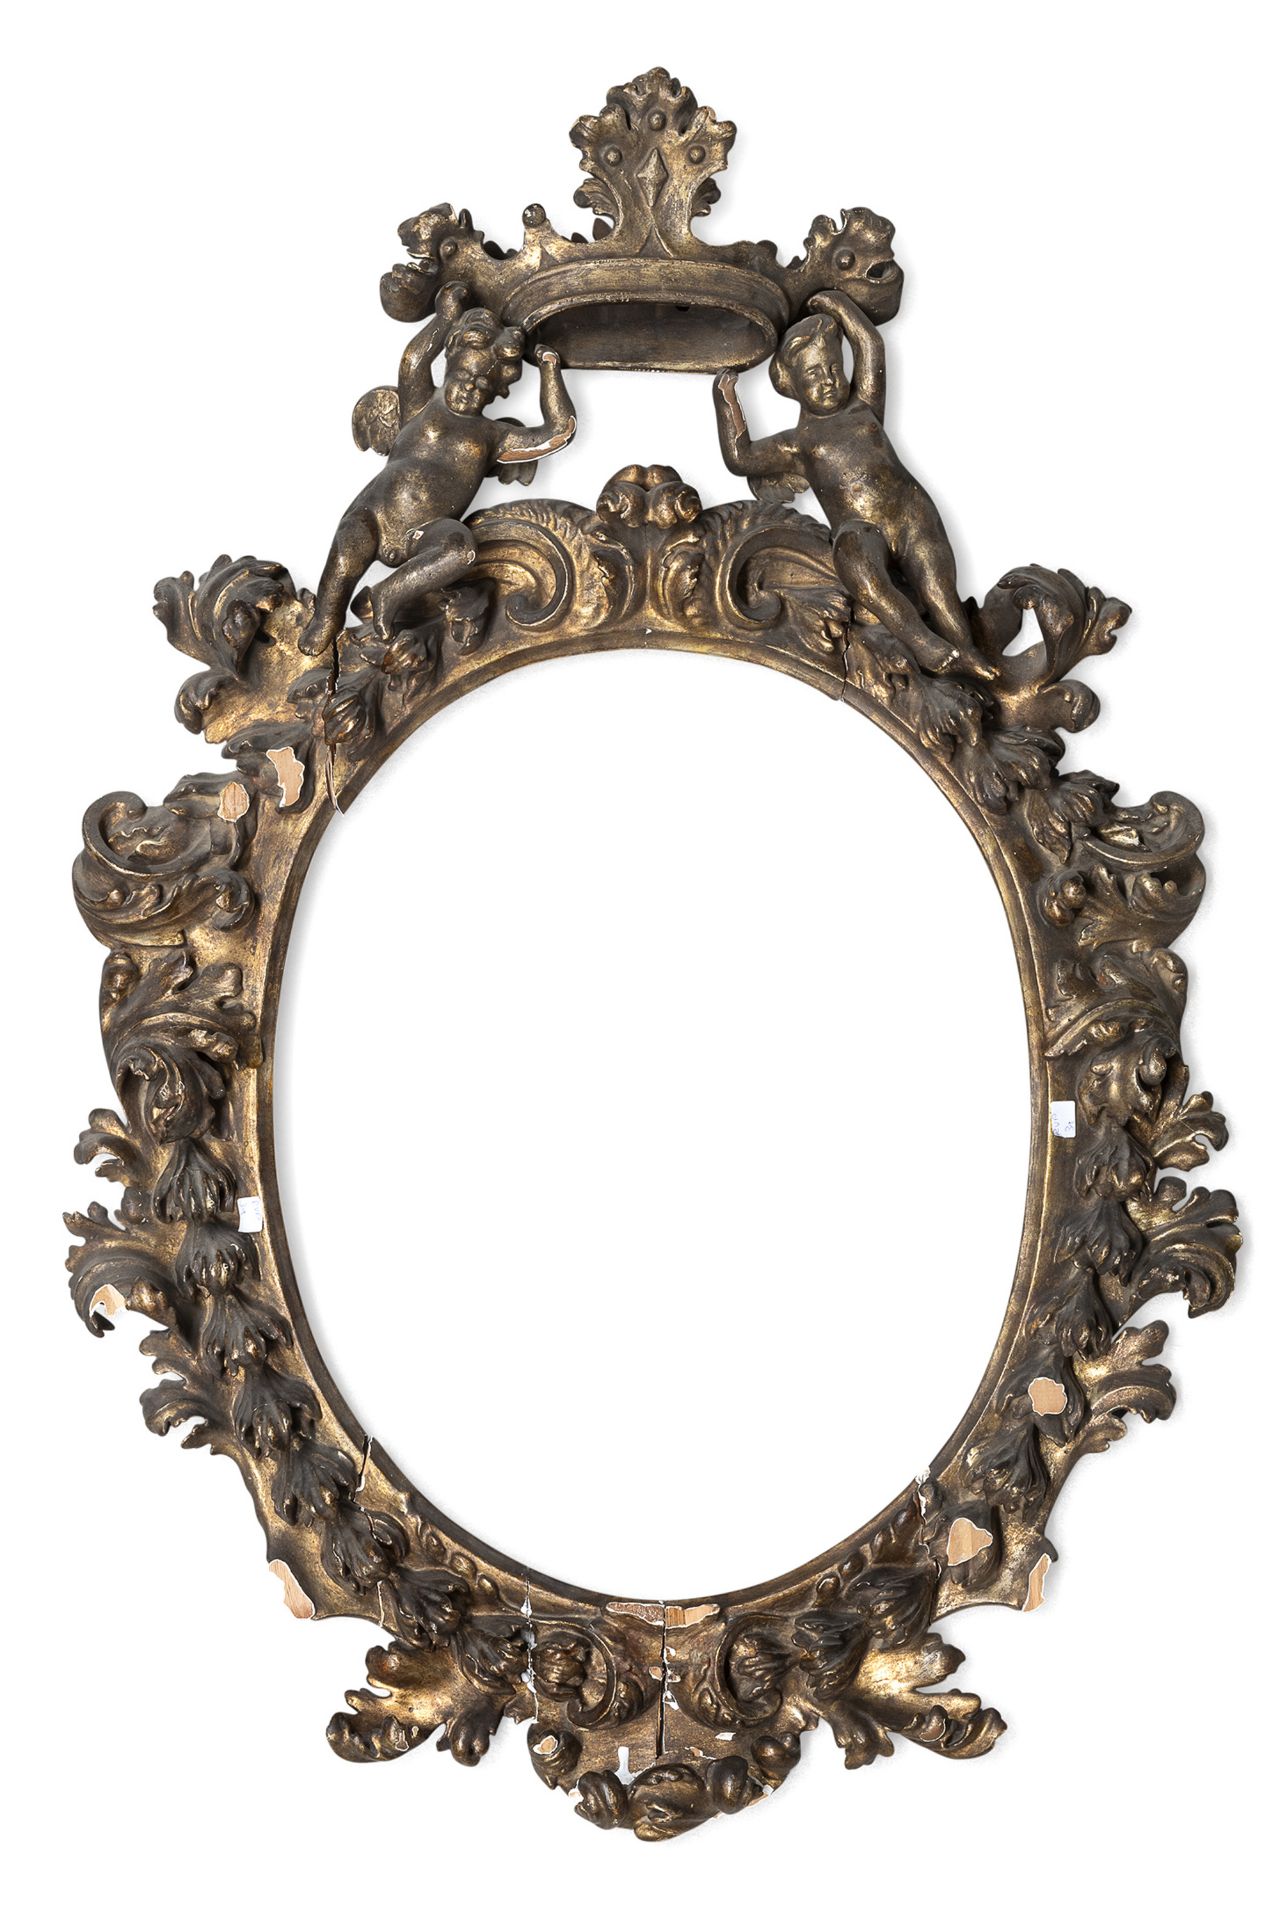 GILTWOOD FRAME ELEMENTS 18TH CENTURY